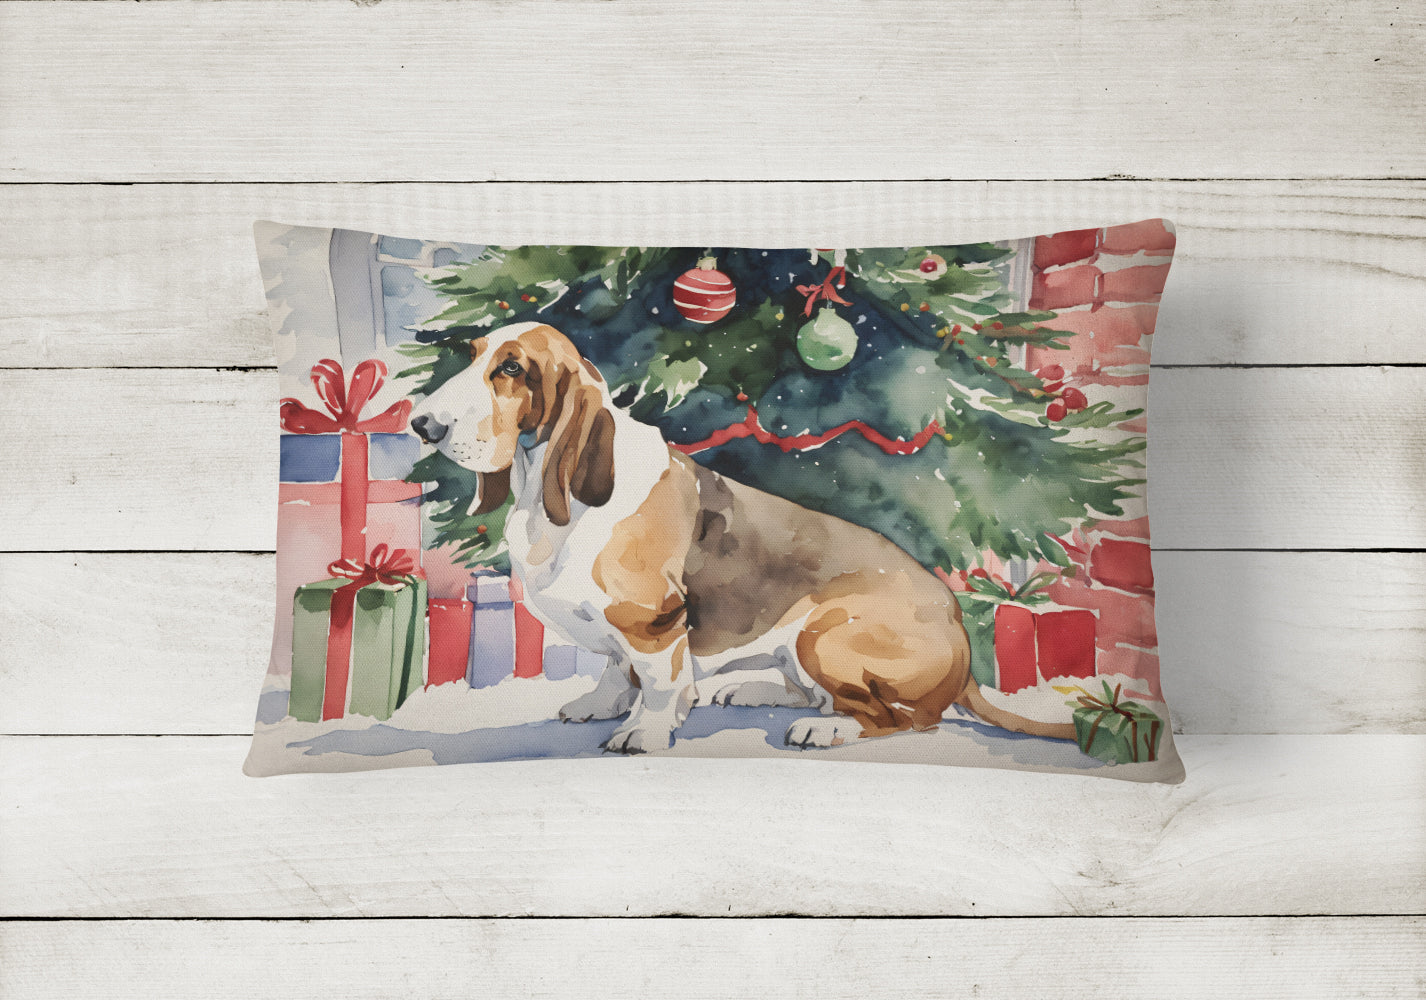 Buy this Basset Hound Christmas Fabric Decorative Pillow